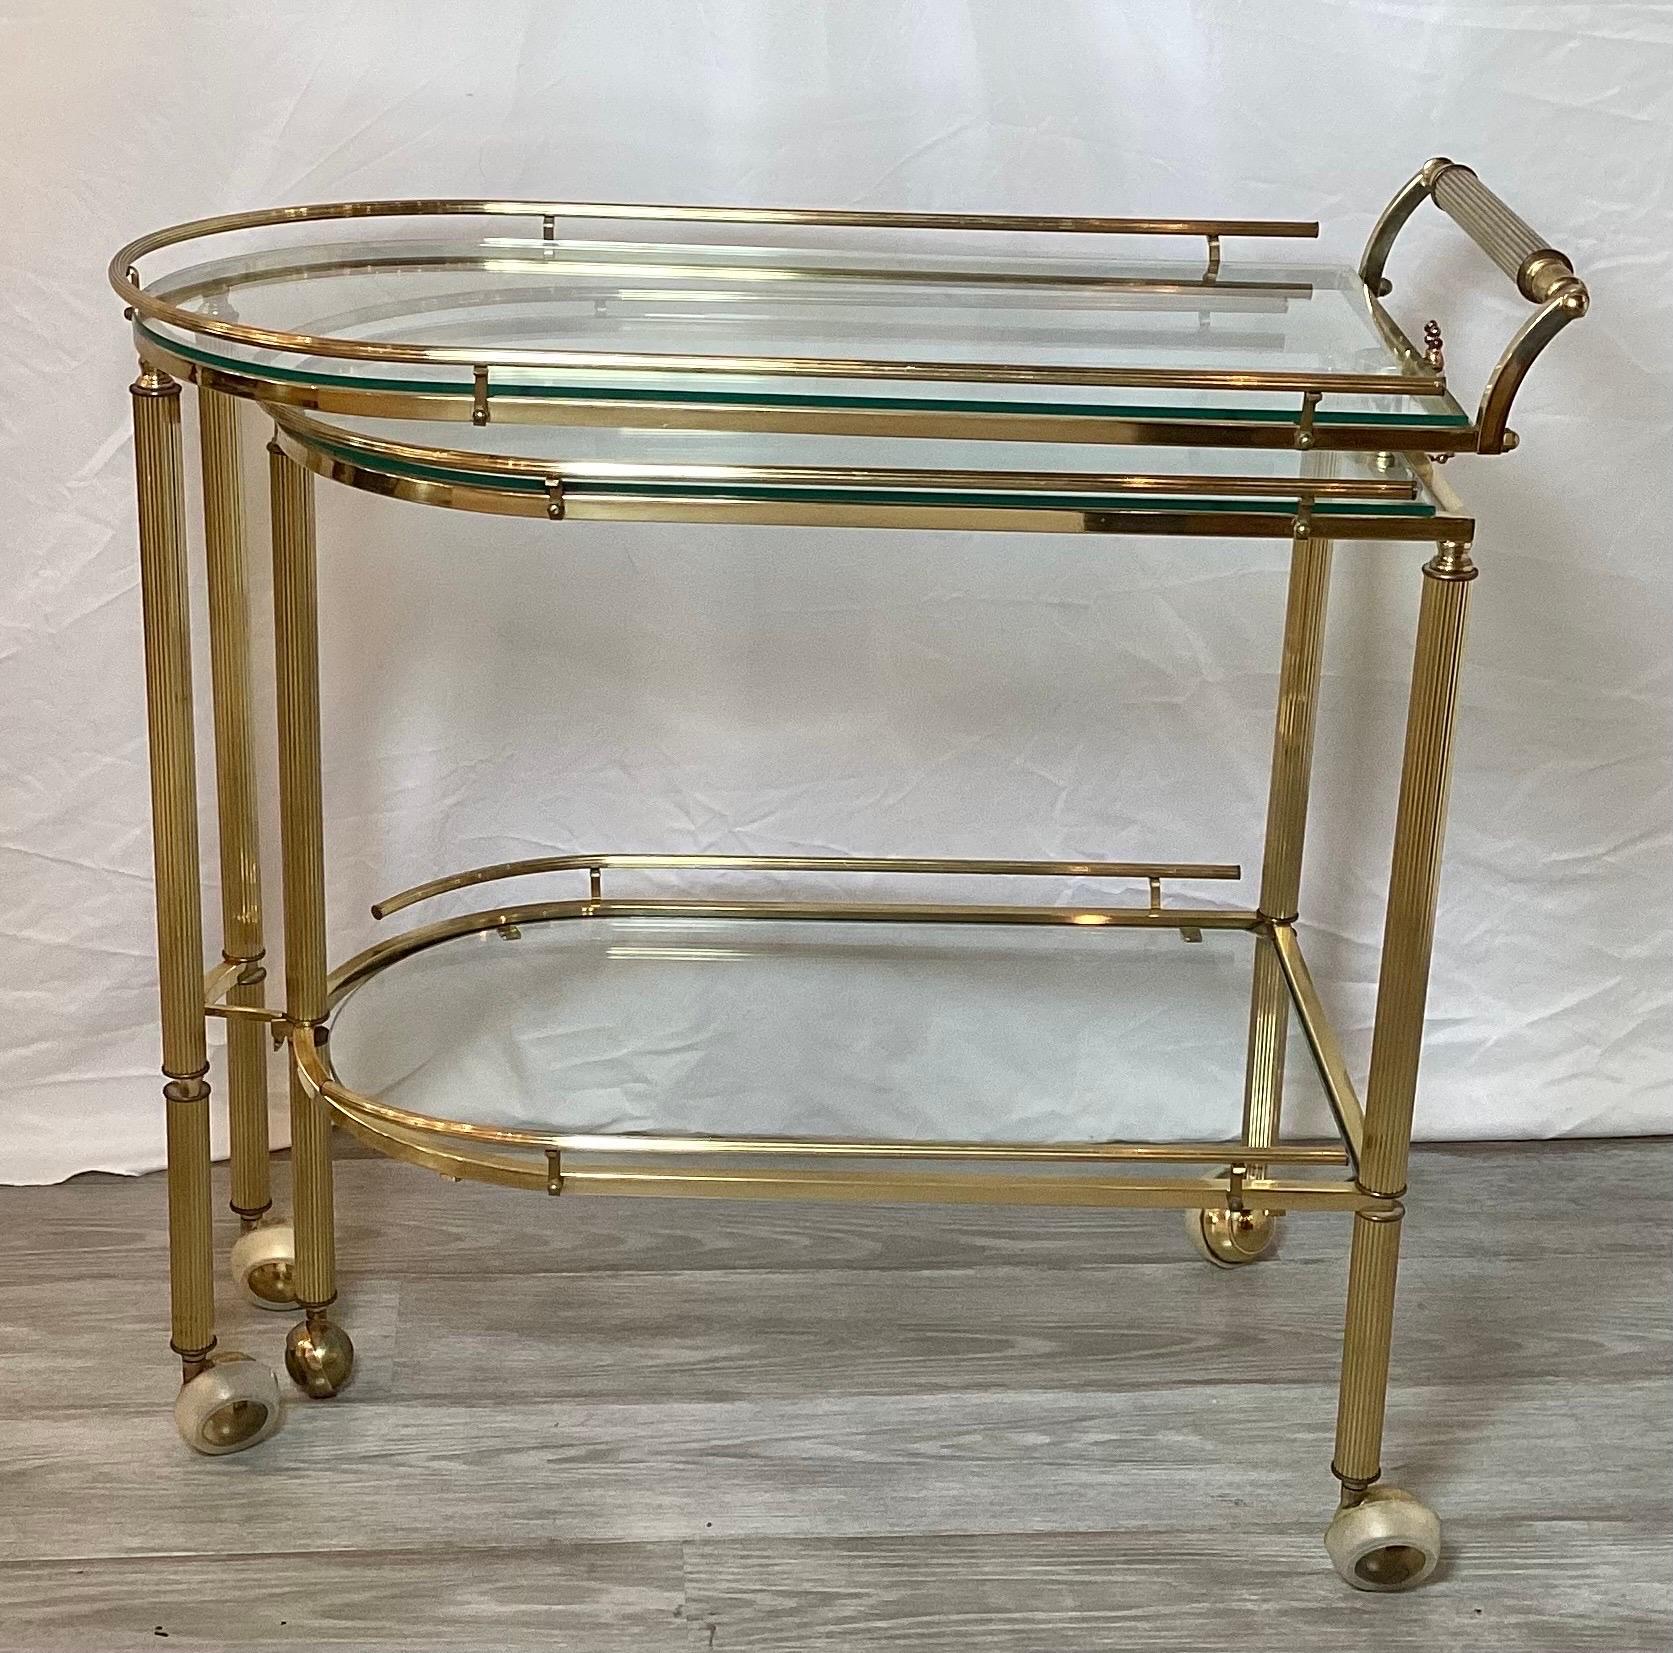 Great expandable mid-century brass bar or serving cart. With a swing out section that gives three shelves for plenty of surface space.